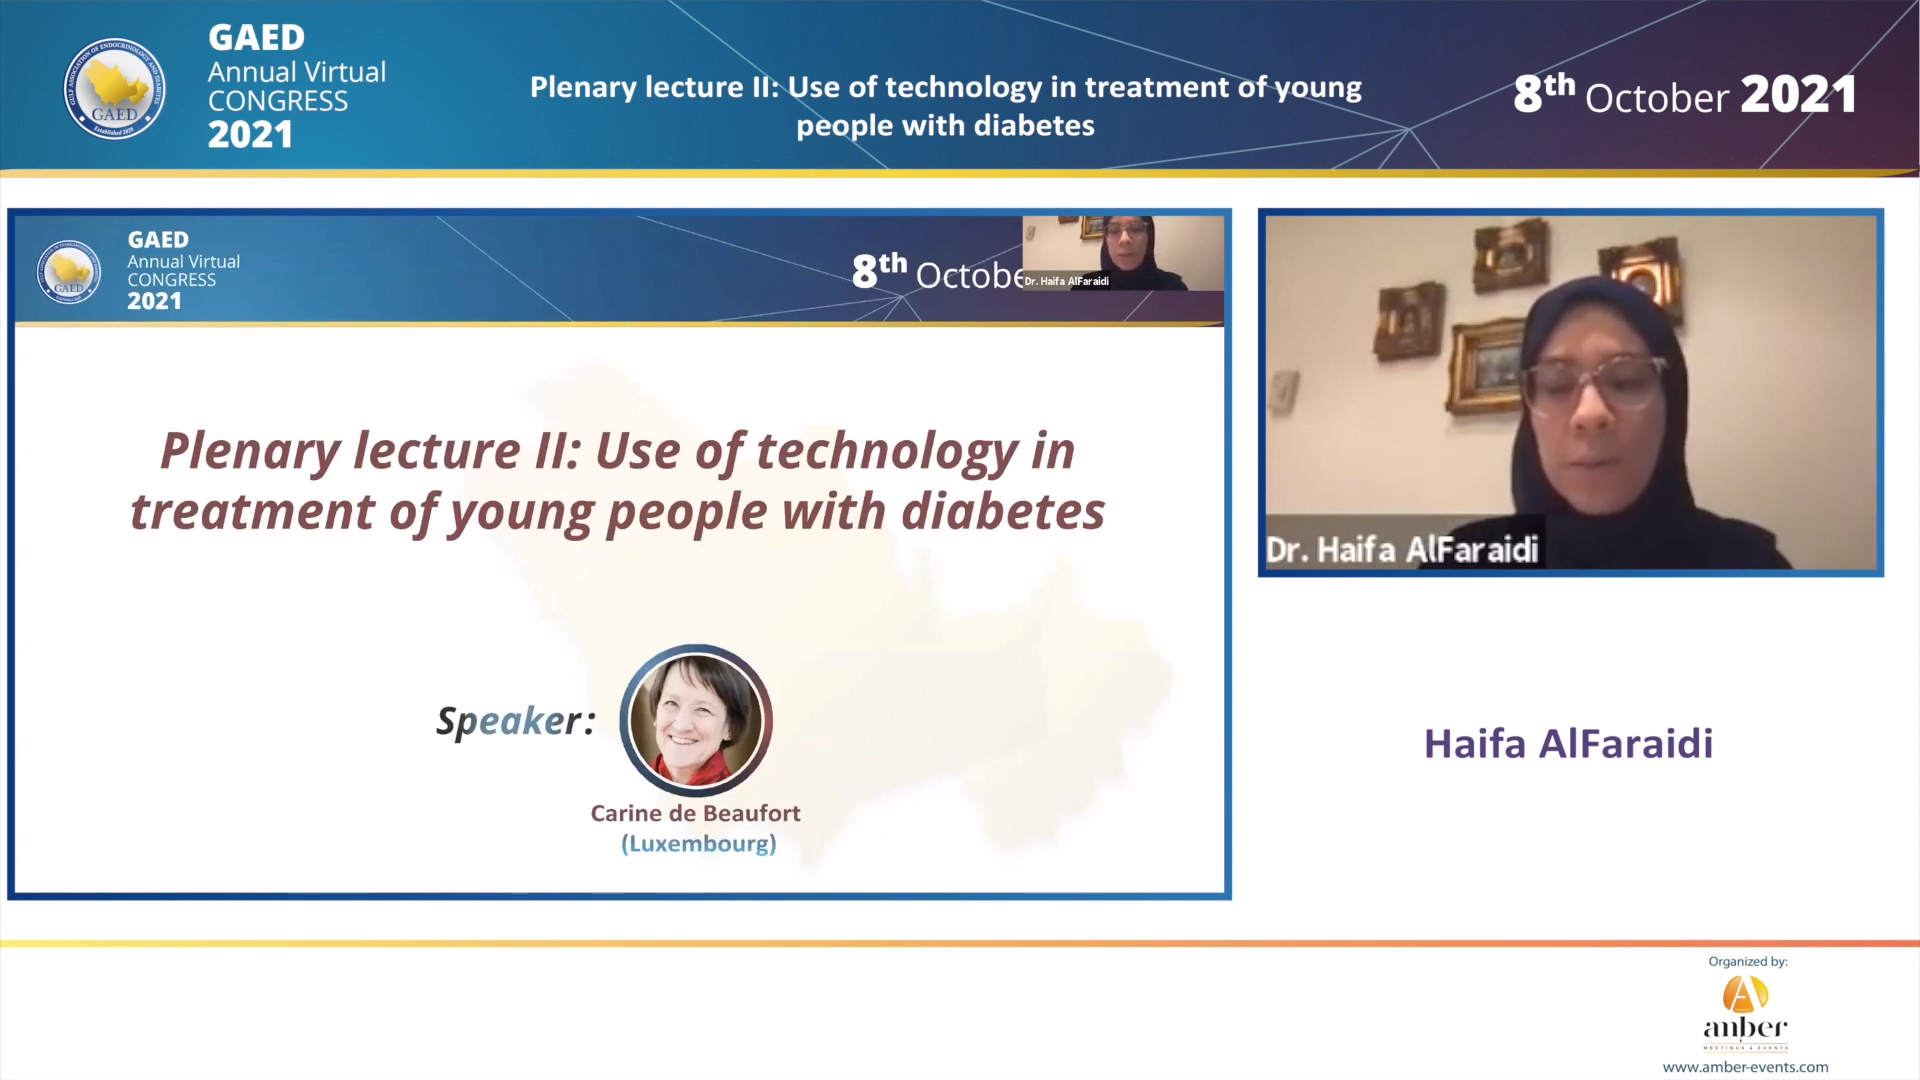 8.10.21 - Day 2, Plenary lecture II - Use of technology in treatment of young people with diabetes